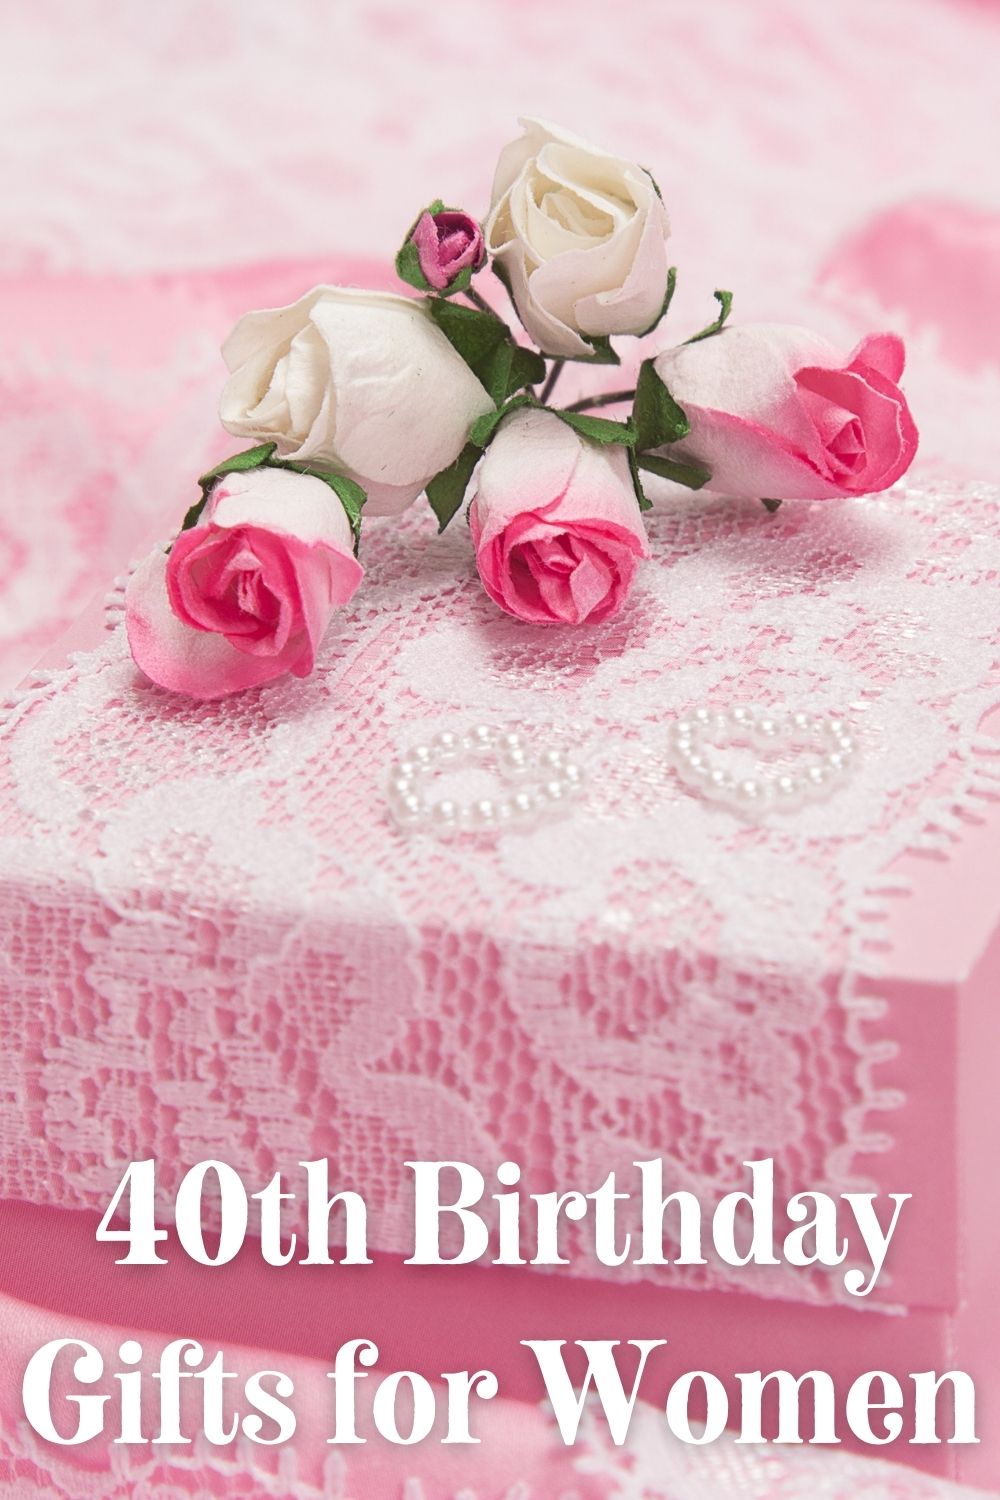 40th birthday gifts for women